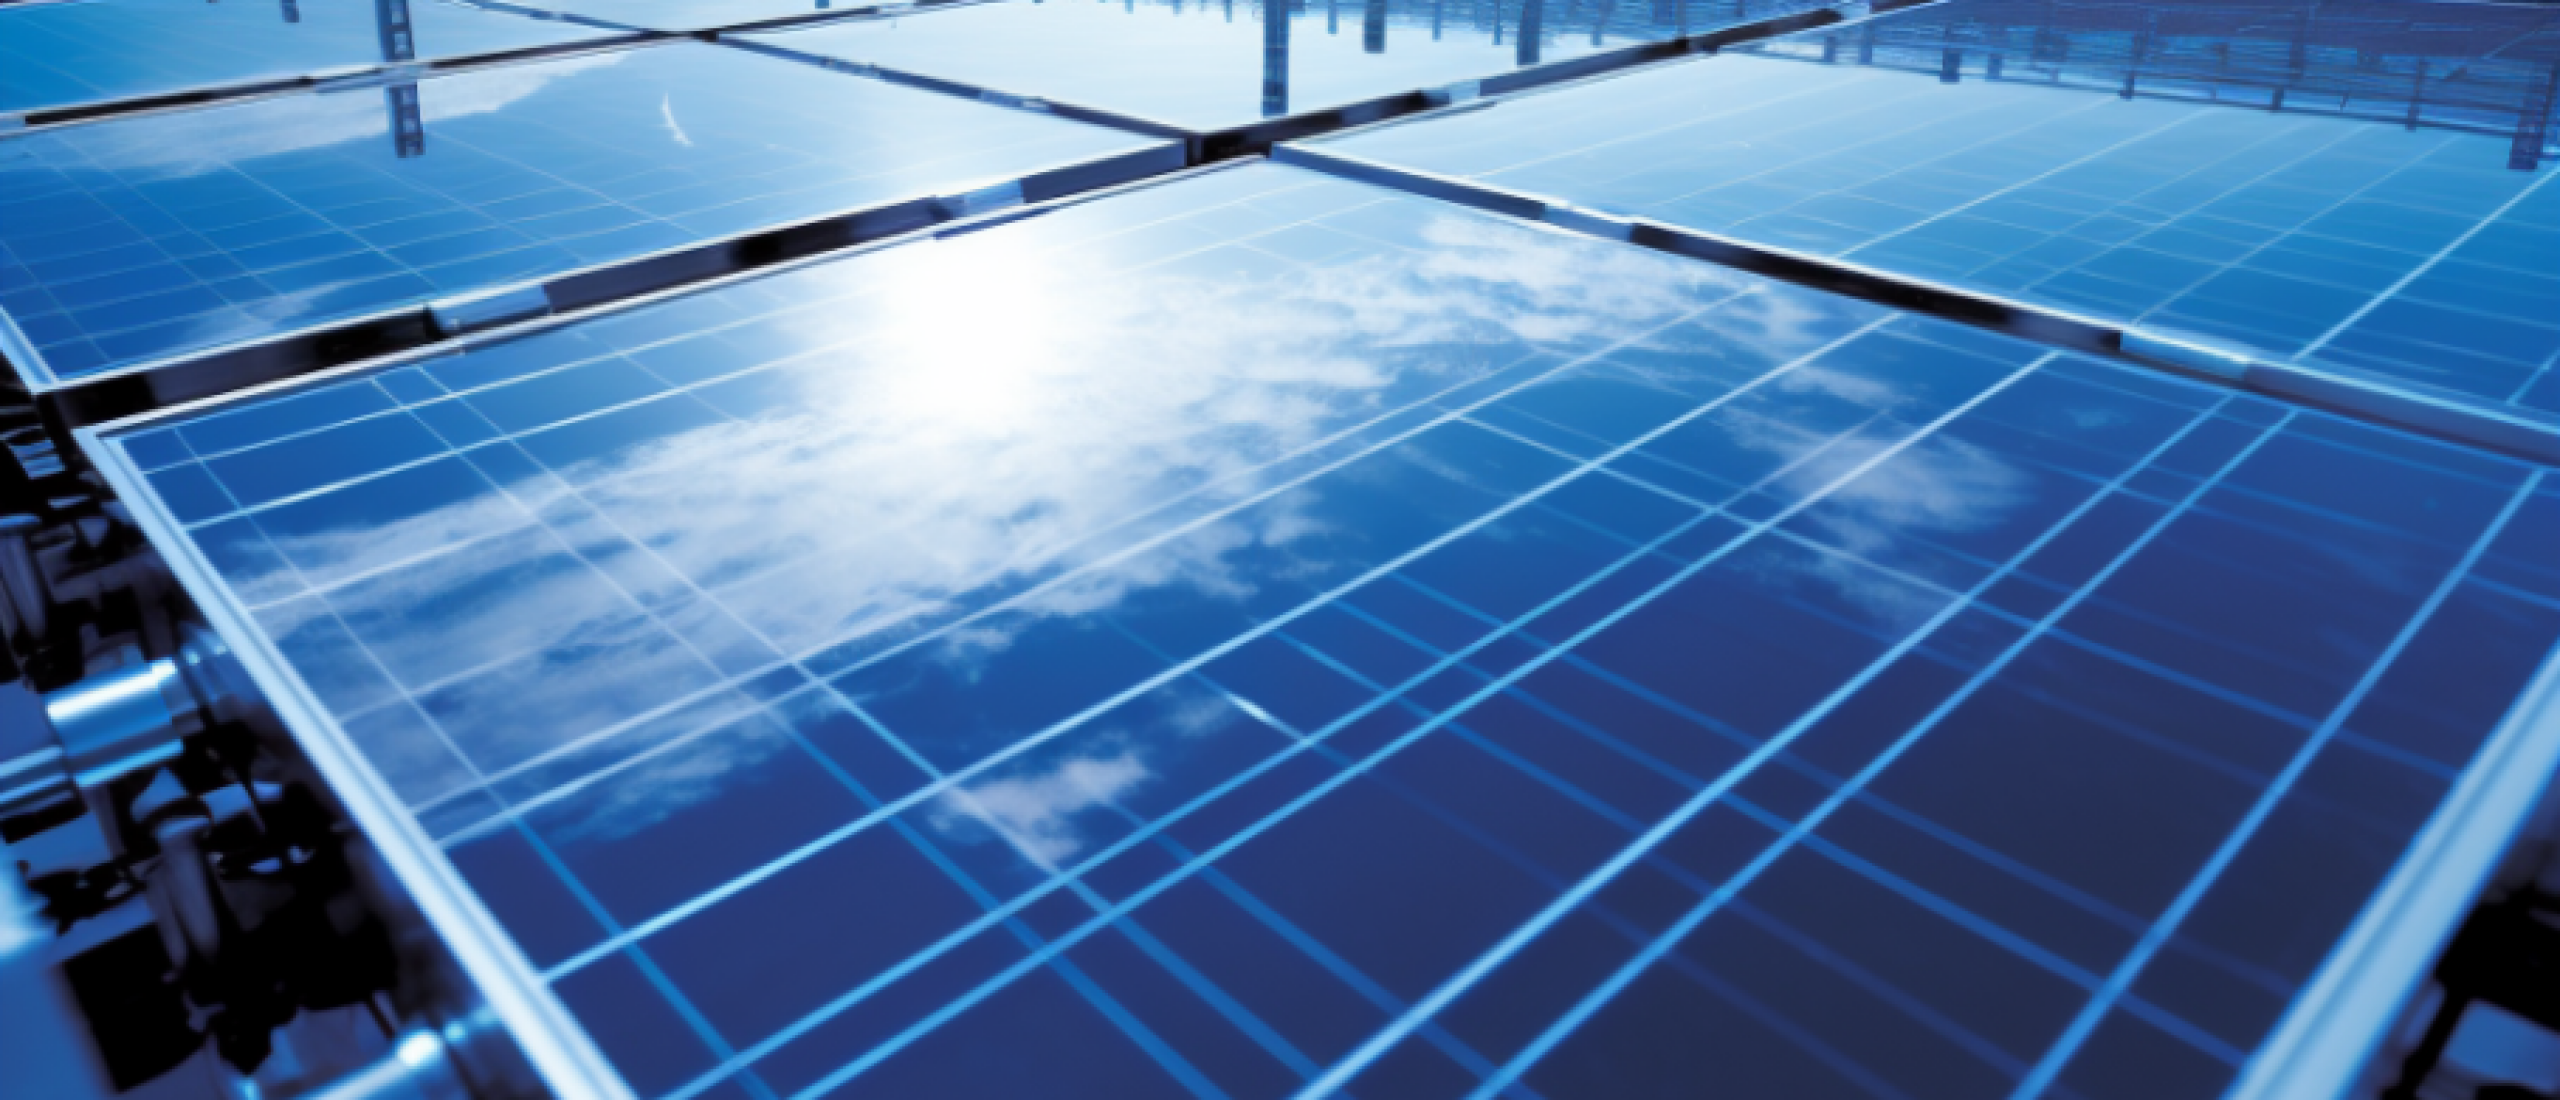 Quality Risks of New PV Cell Technologies  TOPCon and HJT